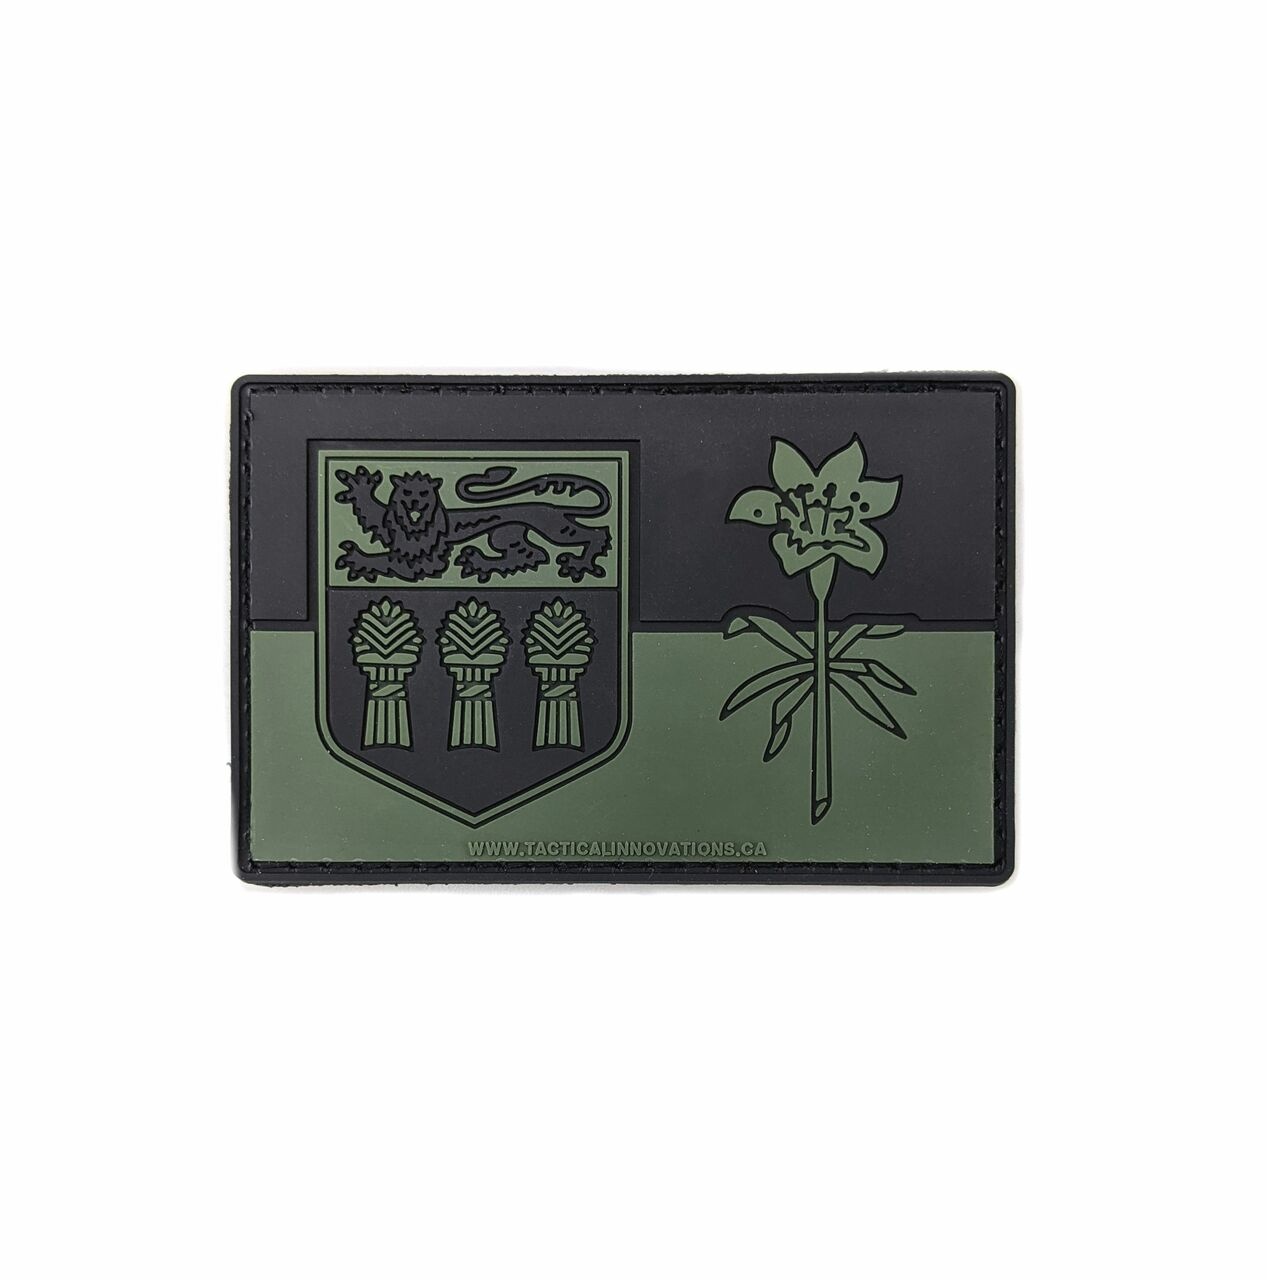 Tactical Innovations Canada PVC Morale Patch - Provincial Flag - 2"x3"